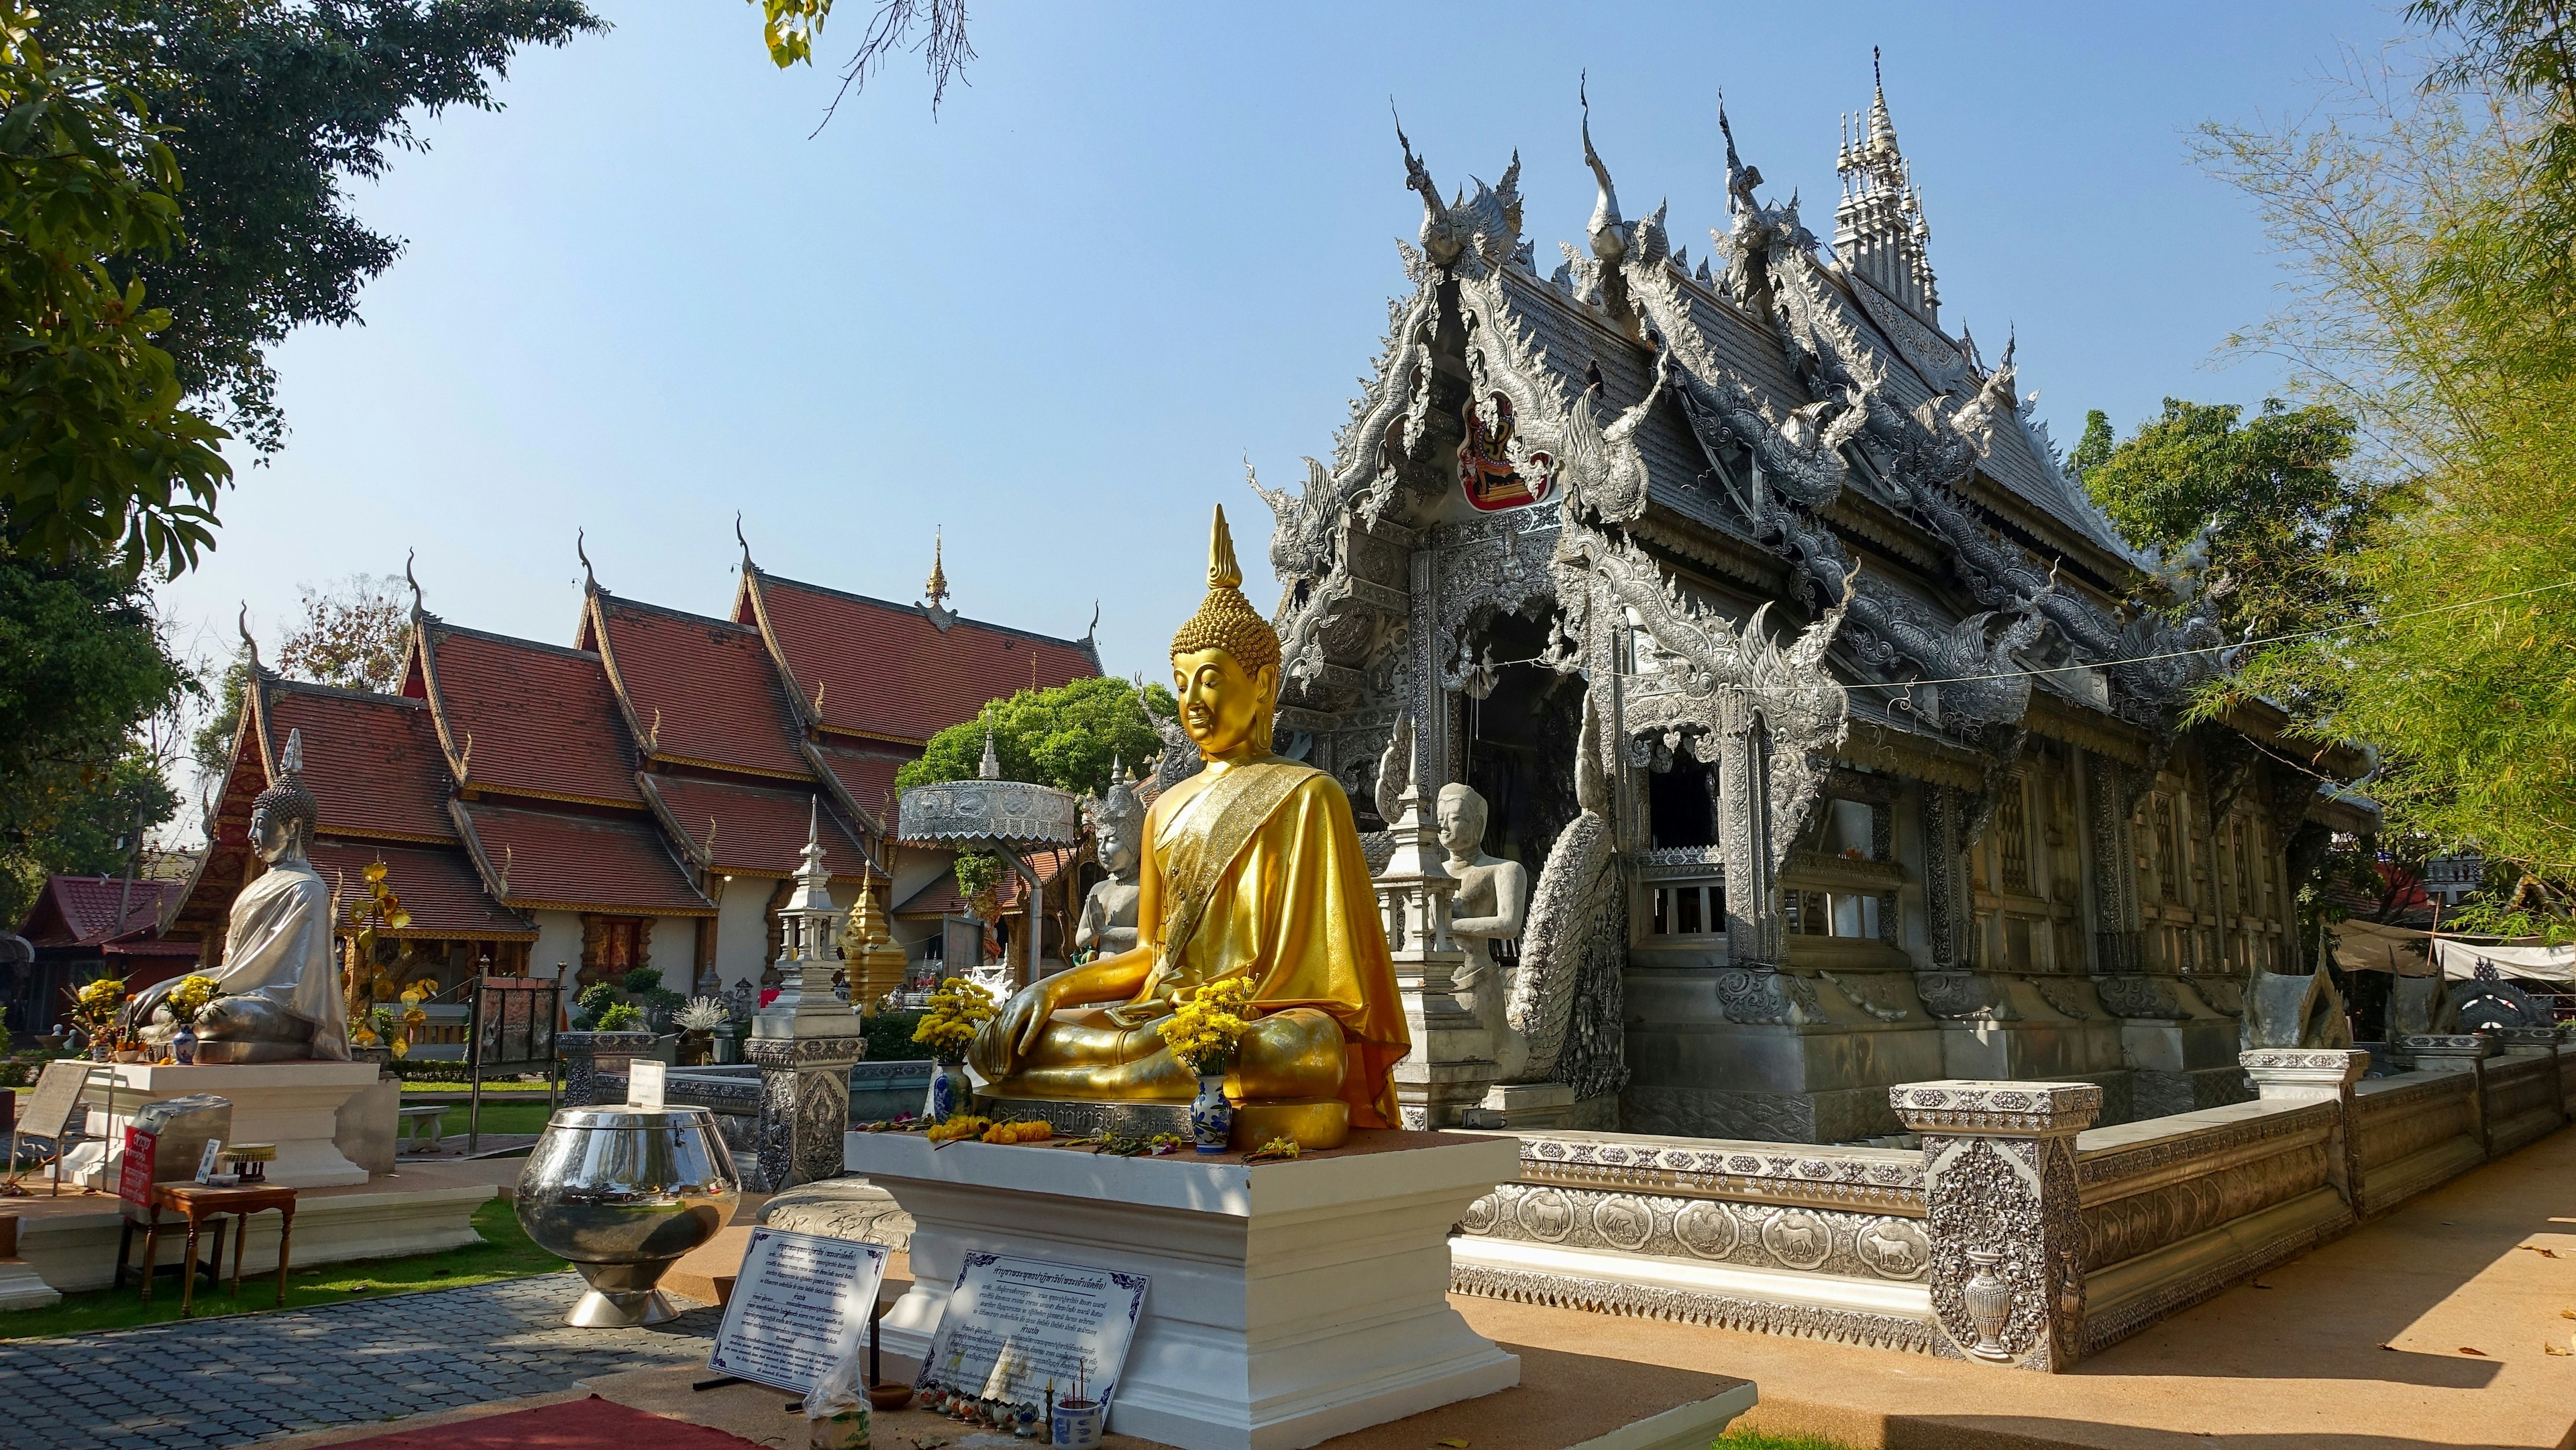 Things to see in Chiang Mai